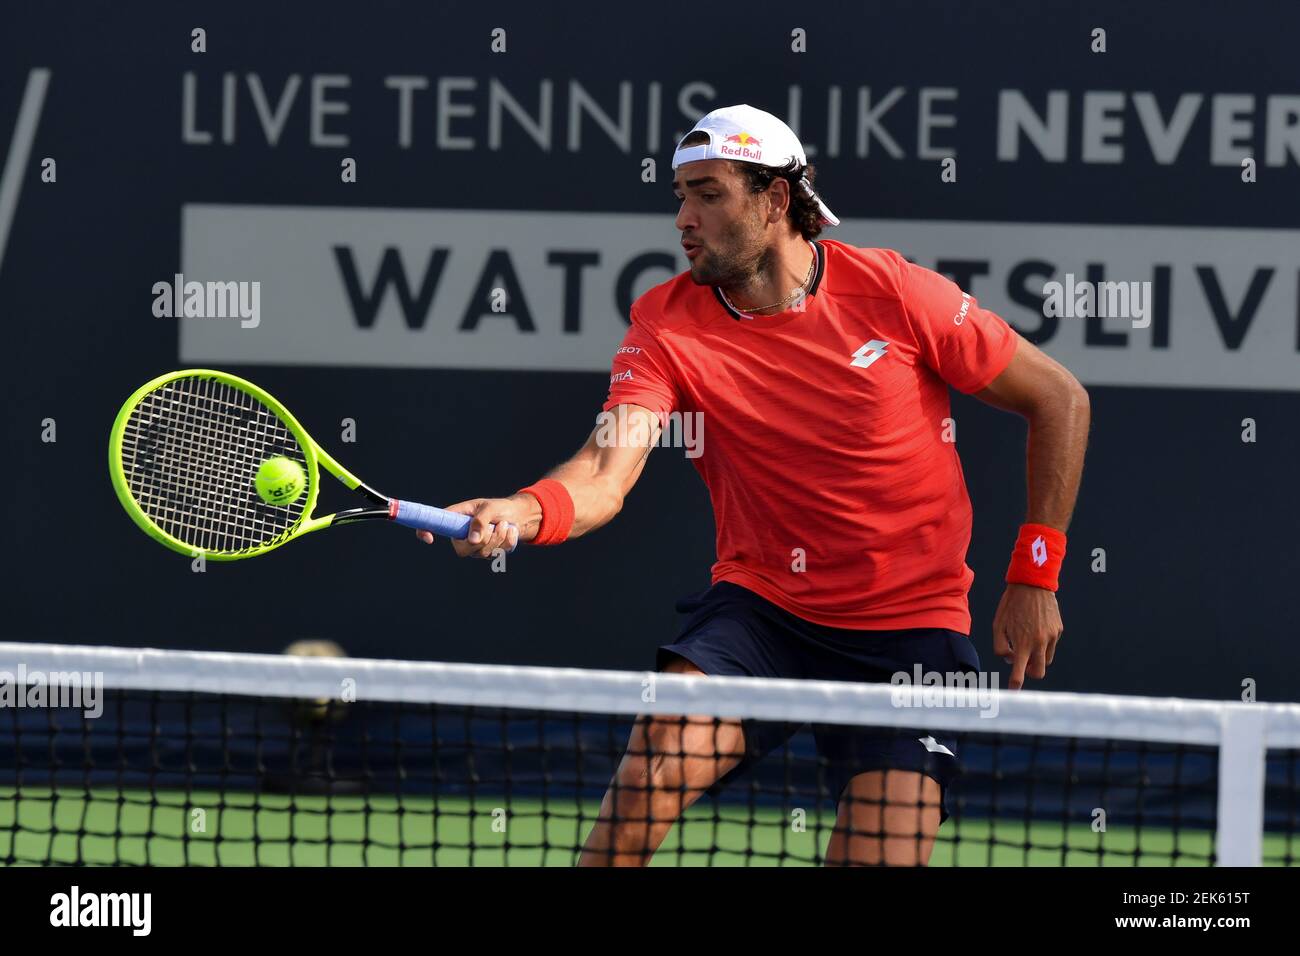 Matteo Berrettini plays match against Dustin Brown at the Patrick  Mouratoglou Academy launches, this Sunday, on June 14, 2020 his big idea:  the Ultimate tennis showdown (UTS). A tennis competition which breaks